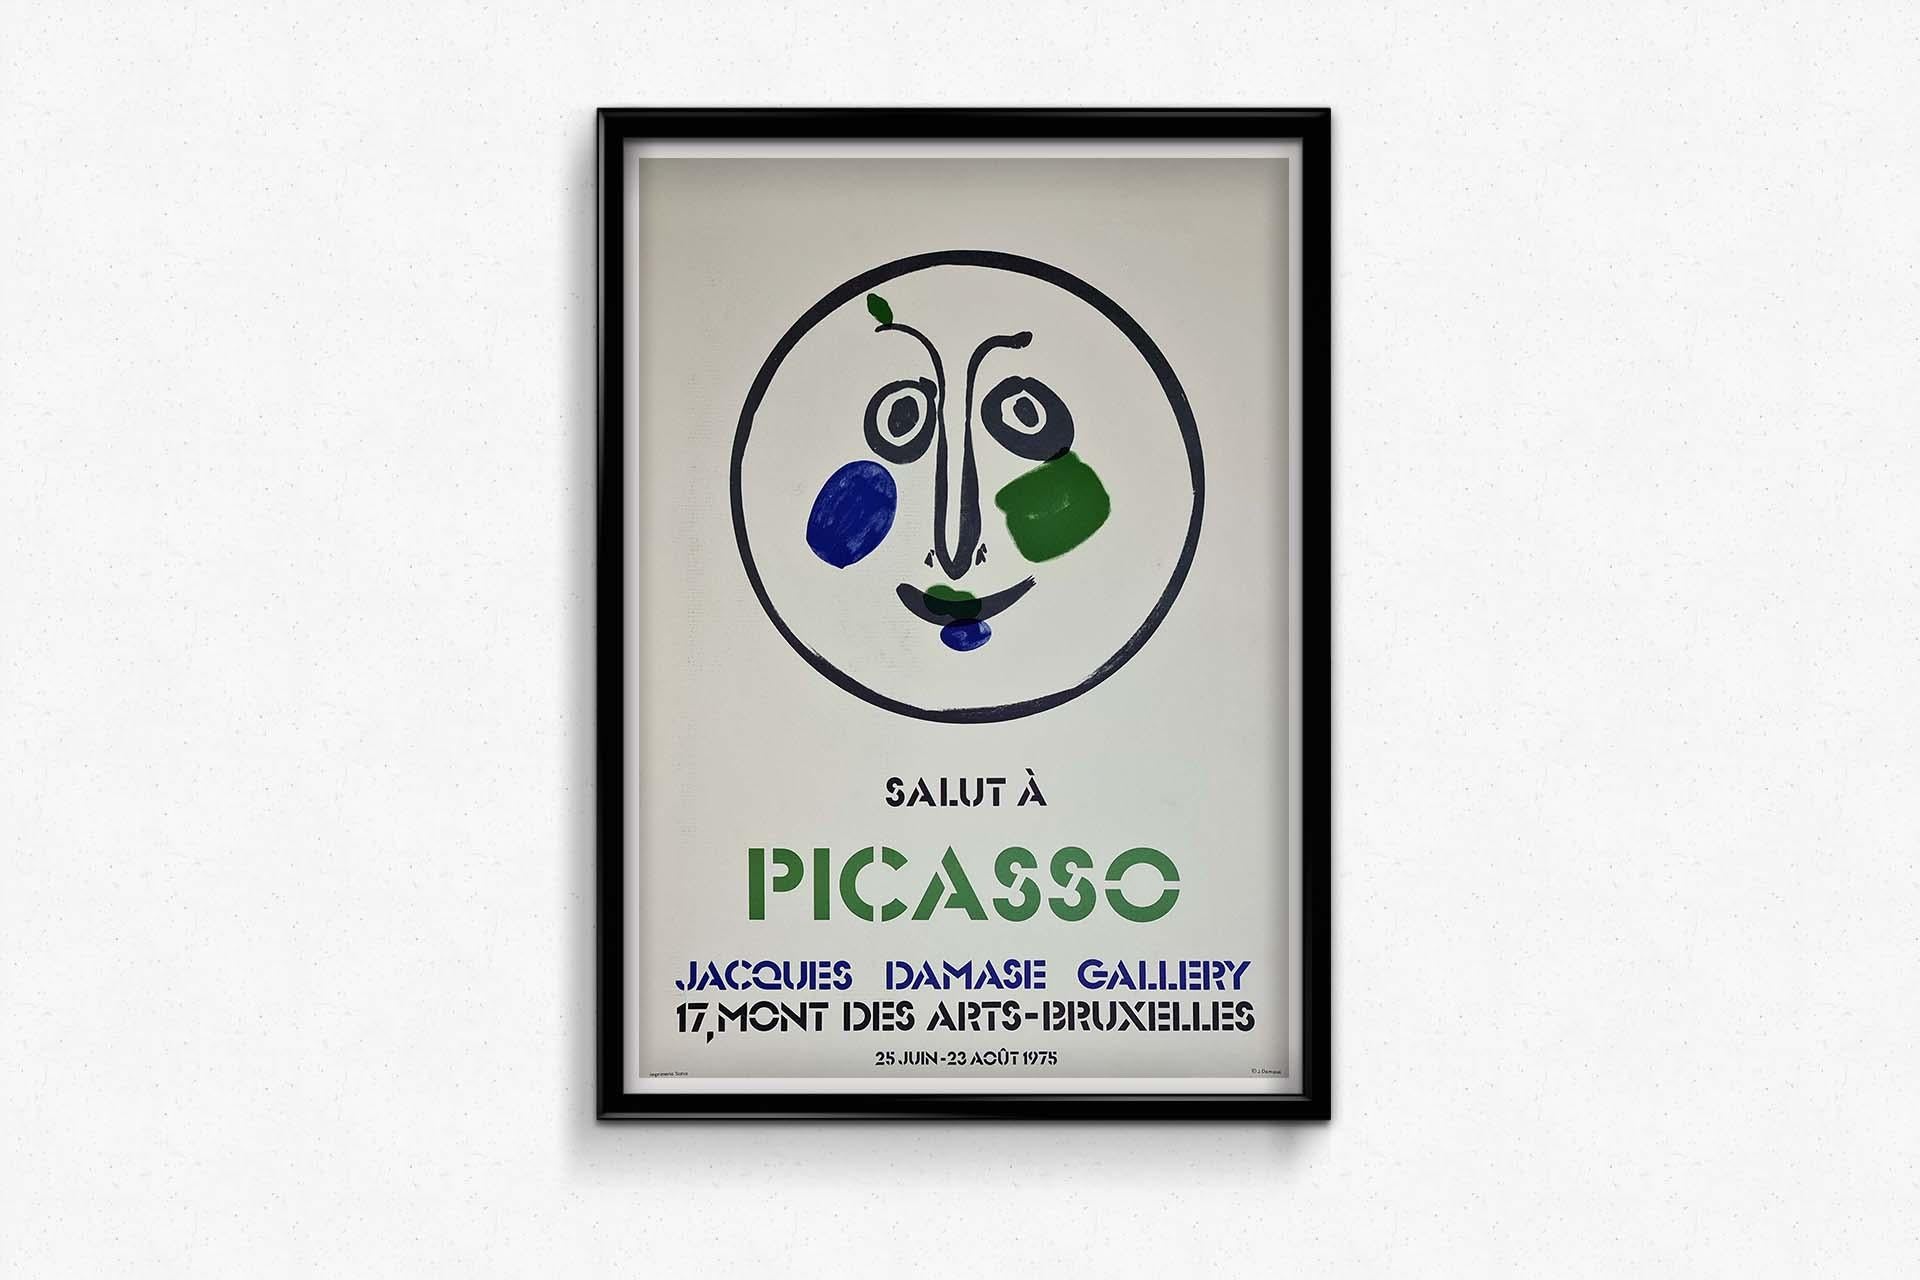 1975 original exhibition poster by Pablo Picasso at the Jacques Damase Gallery 1